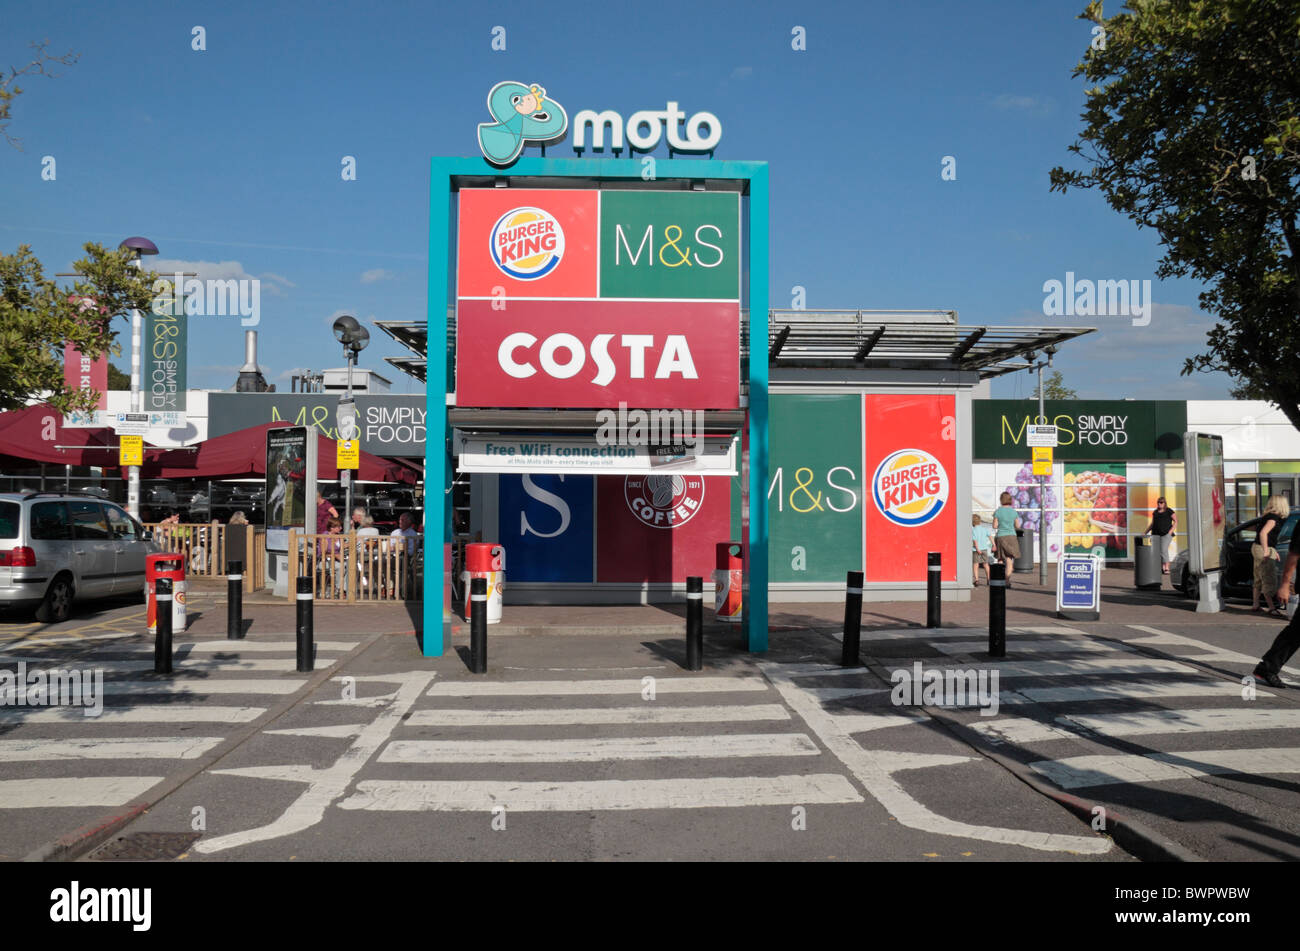 Entrance to the Moto Leigh Delaware M4 services advertising Burger King, M&S and Costa coffee outlets. Stock Photo